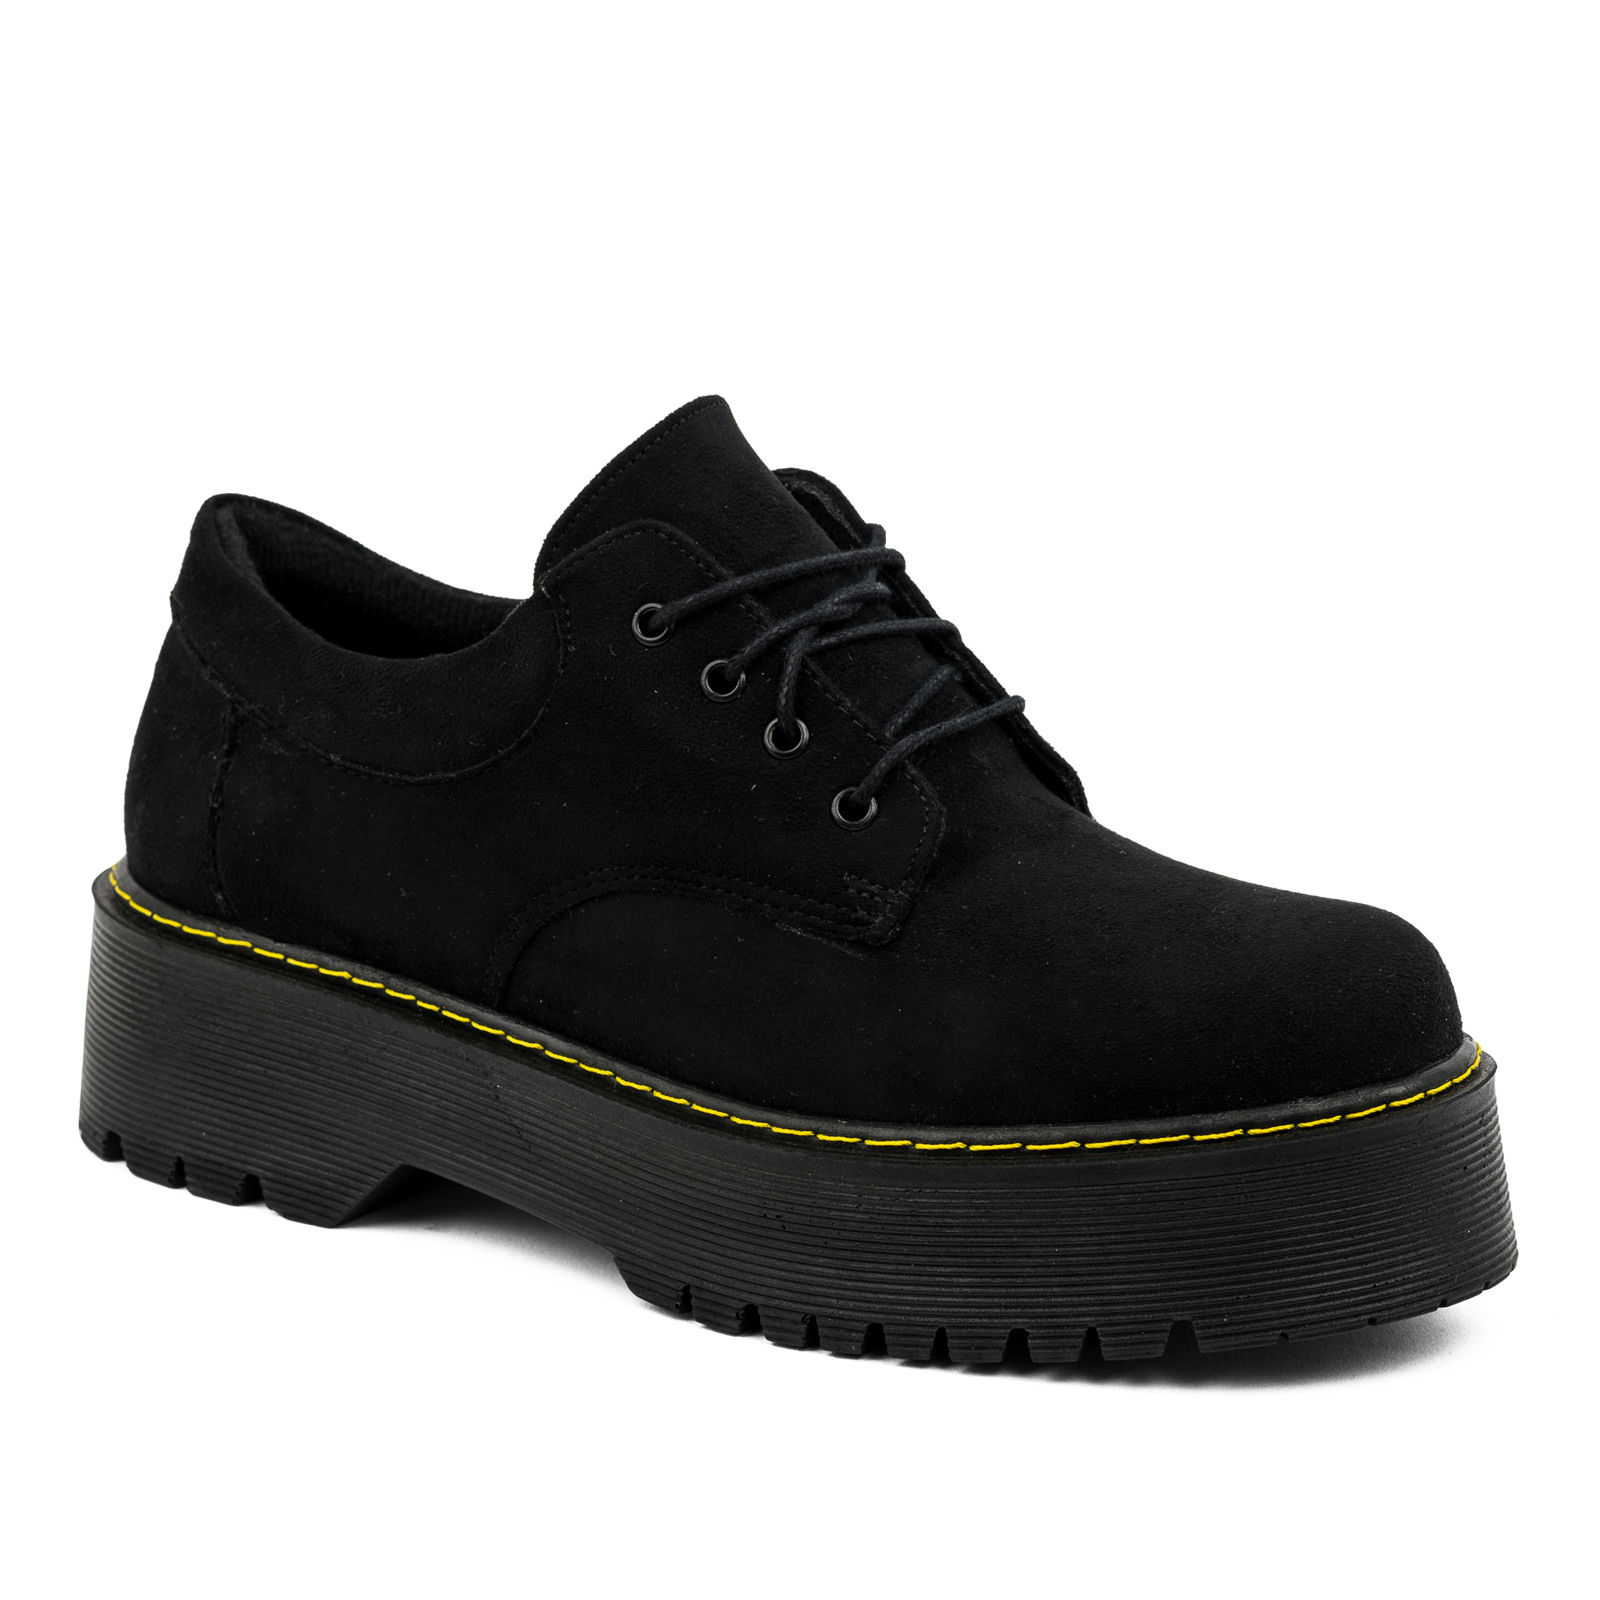 VELOUR OXFORD SHOES WITH YELLOW SEAM - BLACK